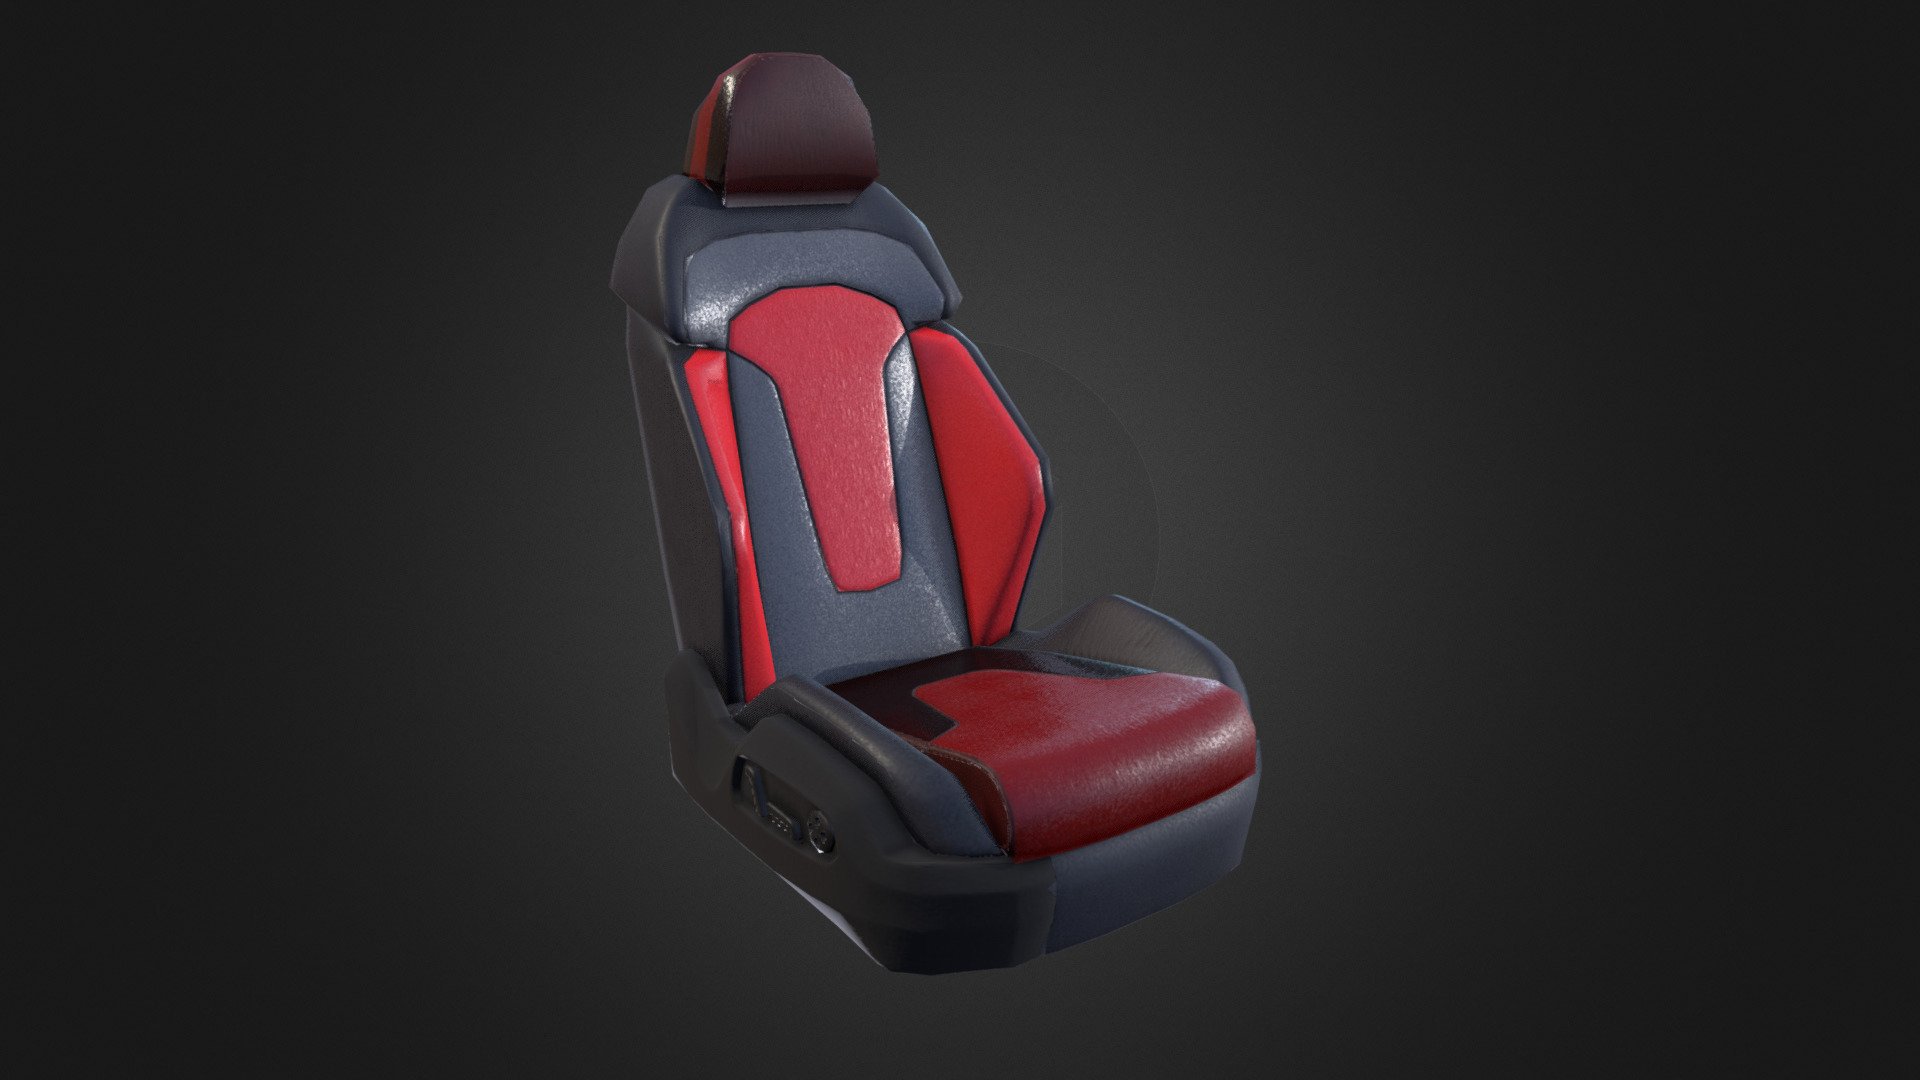 A low poly Car seat, create with Maya 2018 and textured in Substance Painter.
3600 Tris - Car Seat - 3D model by steexx7 (@s7x) 3d model